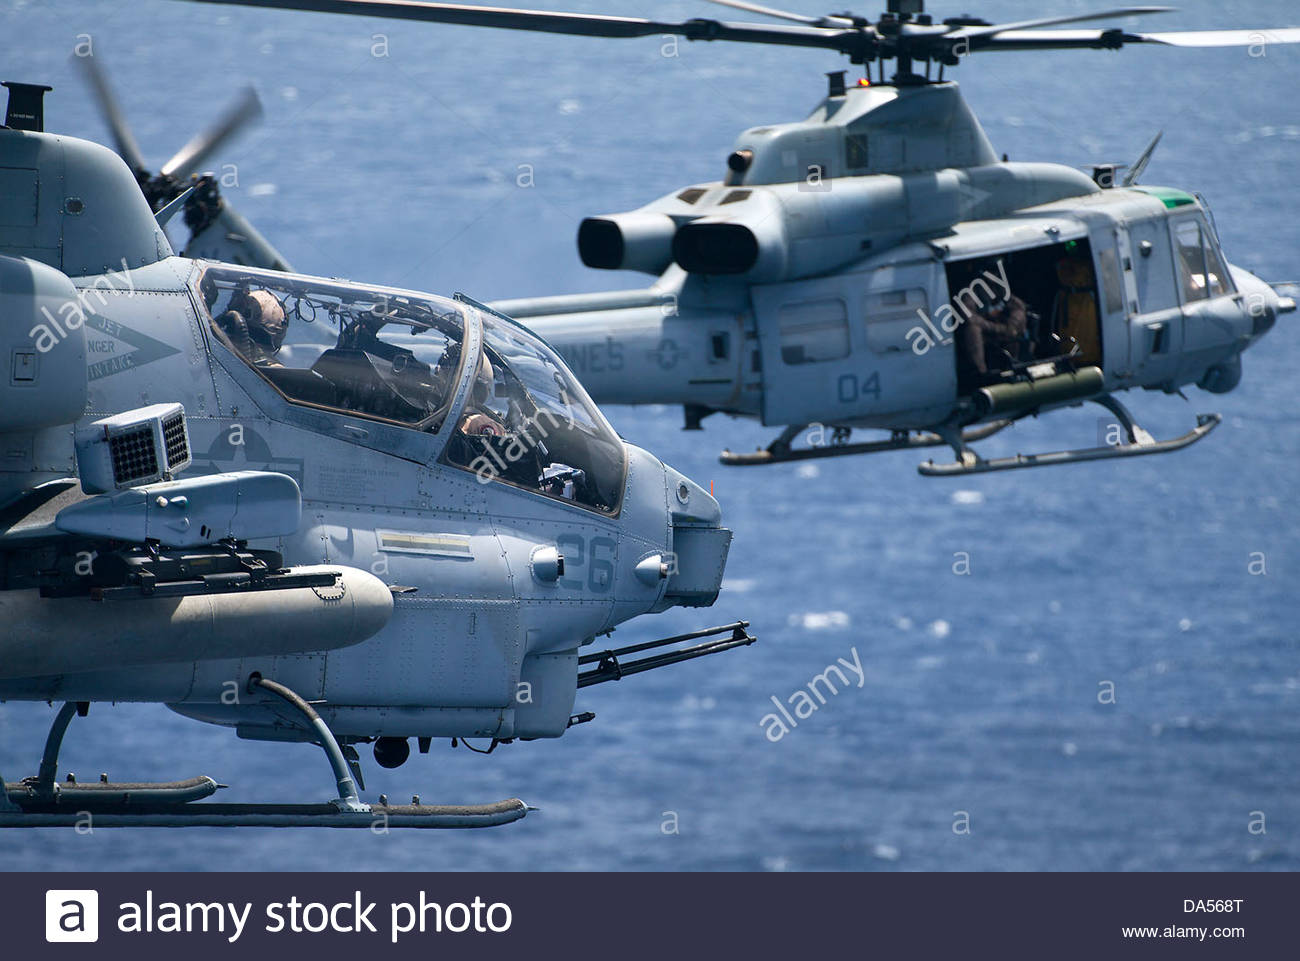 us-marine-corps-uh-1w-super-cobra-helicopter-and-uh-1y-venom-in-formation-DA568T.jpg